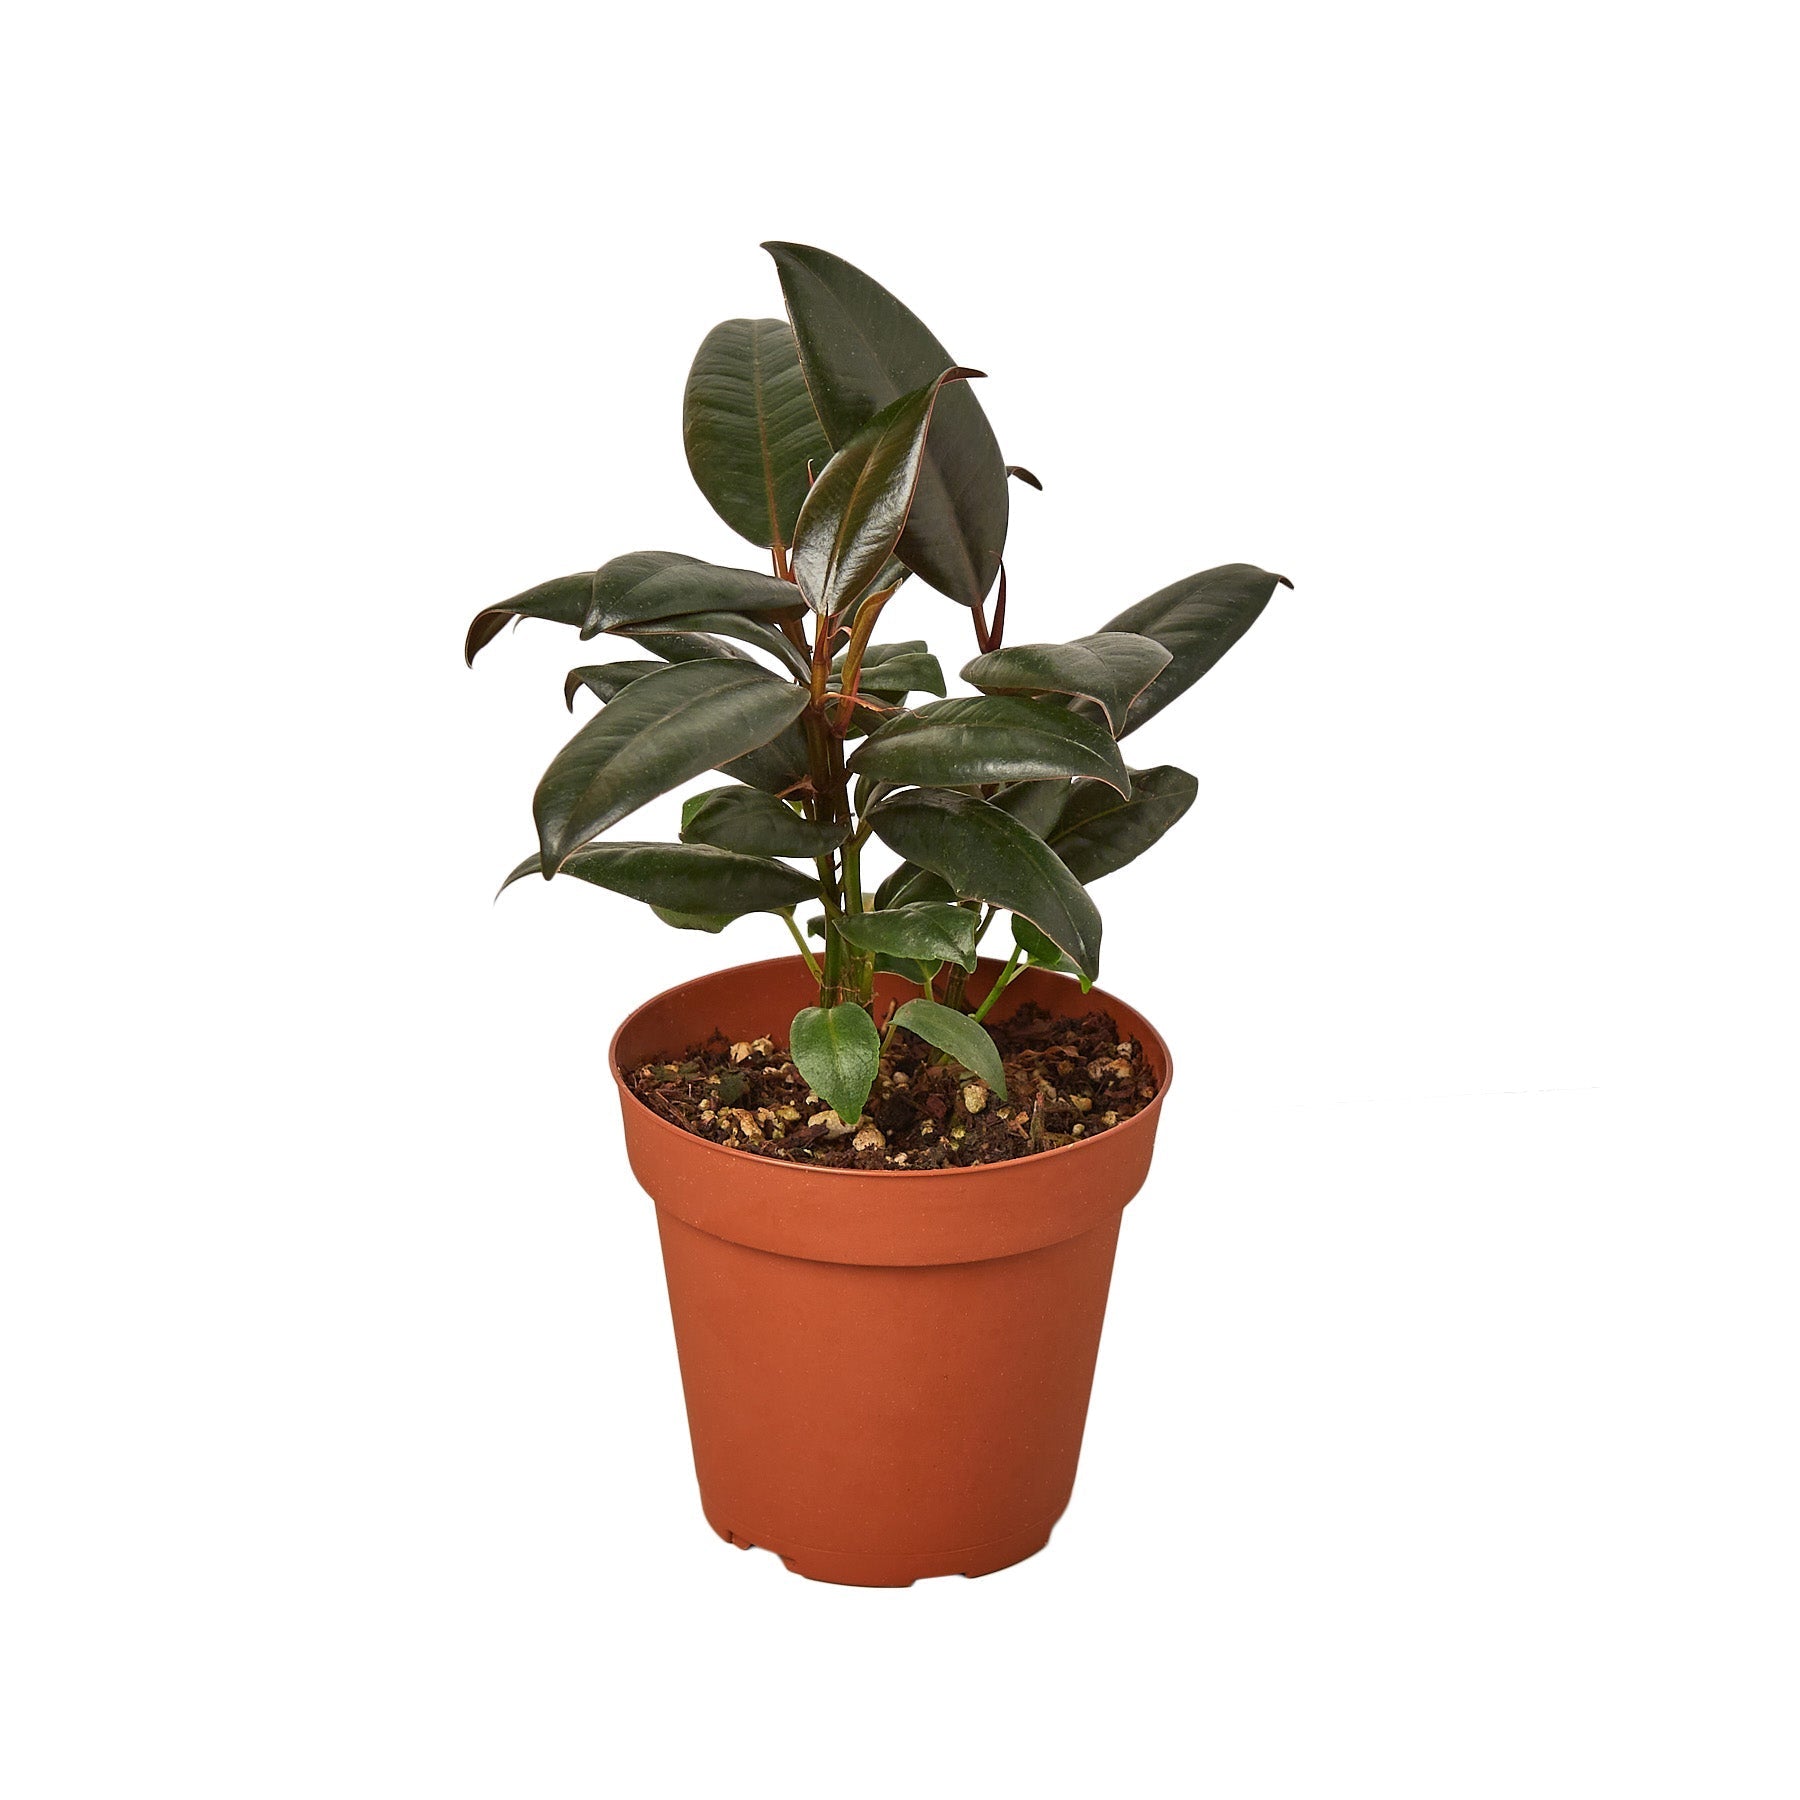 A small plant in a pot on a white background available at a nearby nursery.